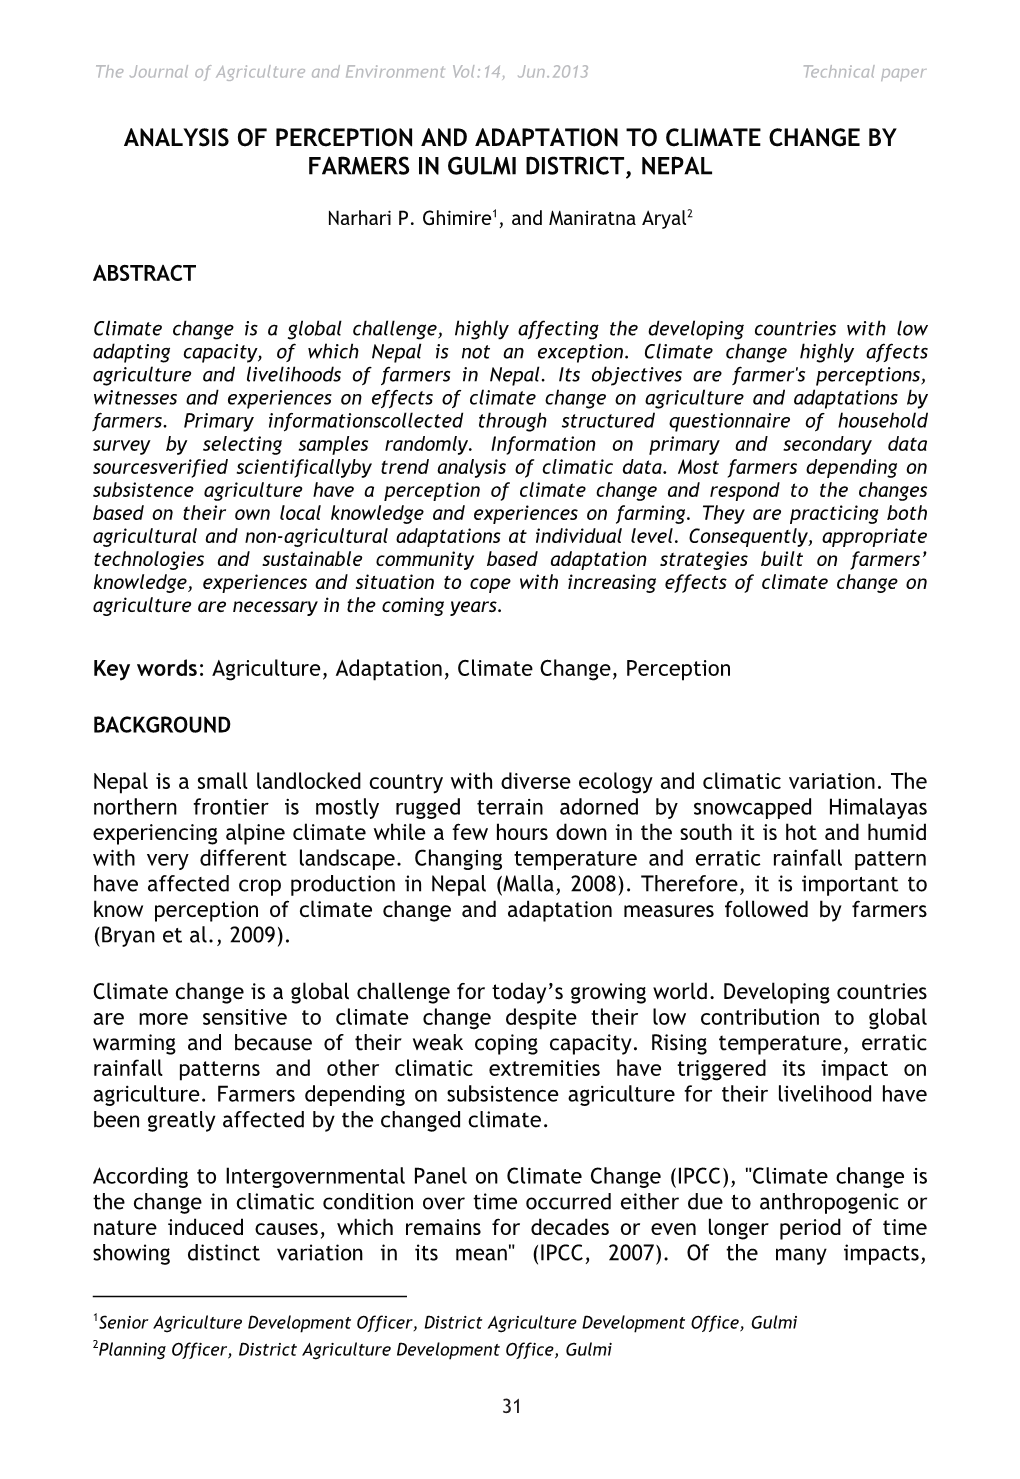 Analysis of Perception and Adaptation to Climate Change by Farmers in Gulmi District, Nepal